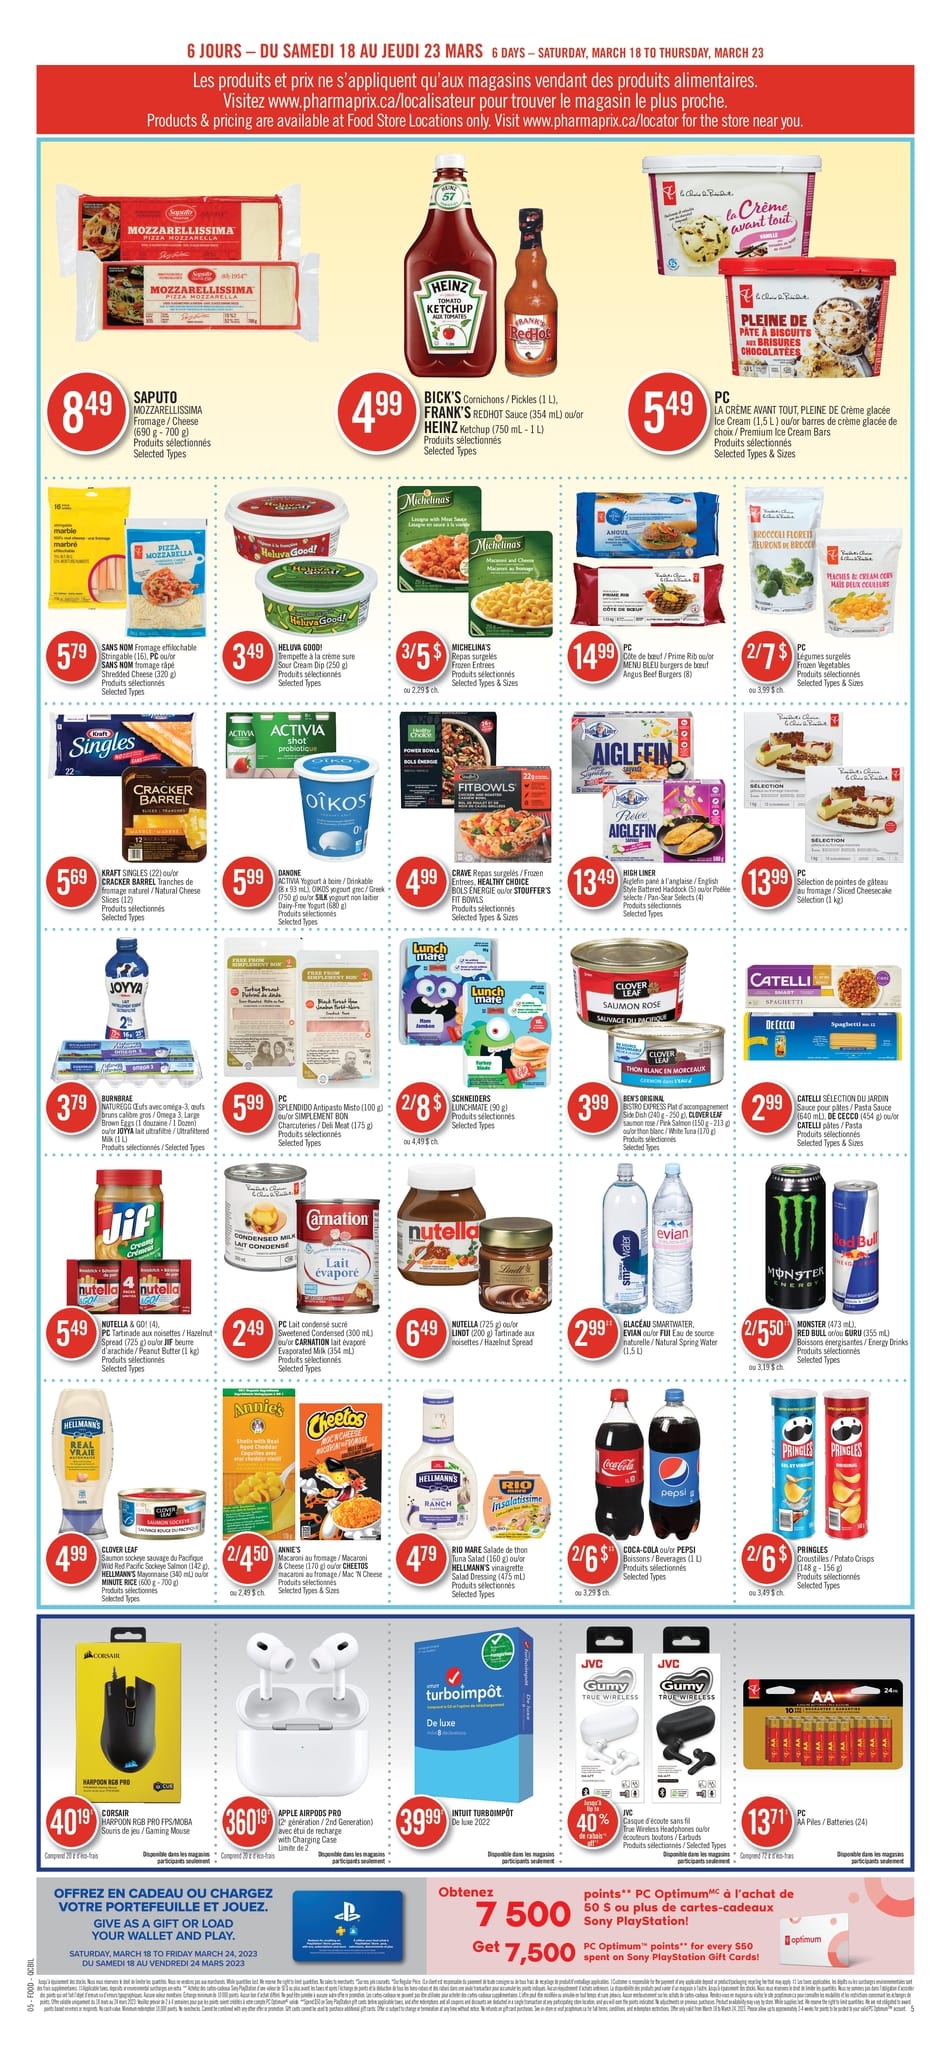 Pharmaprix - Weekly Flyer Specials - Page 7